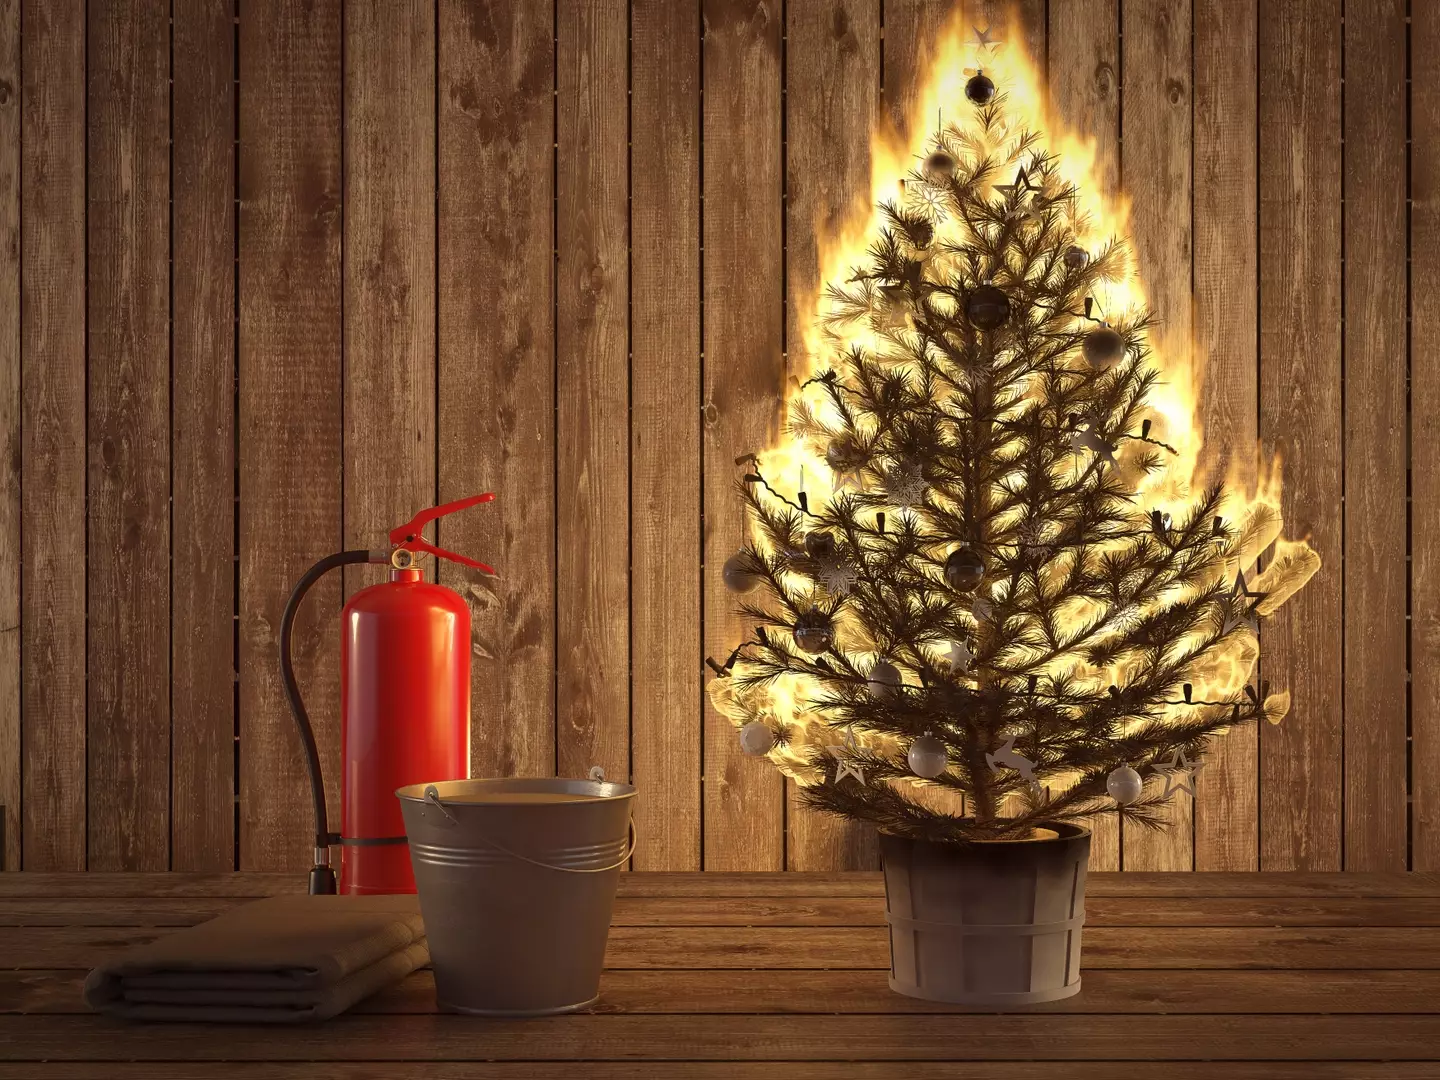 Christmas trees can be a fire hazard.